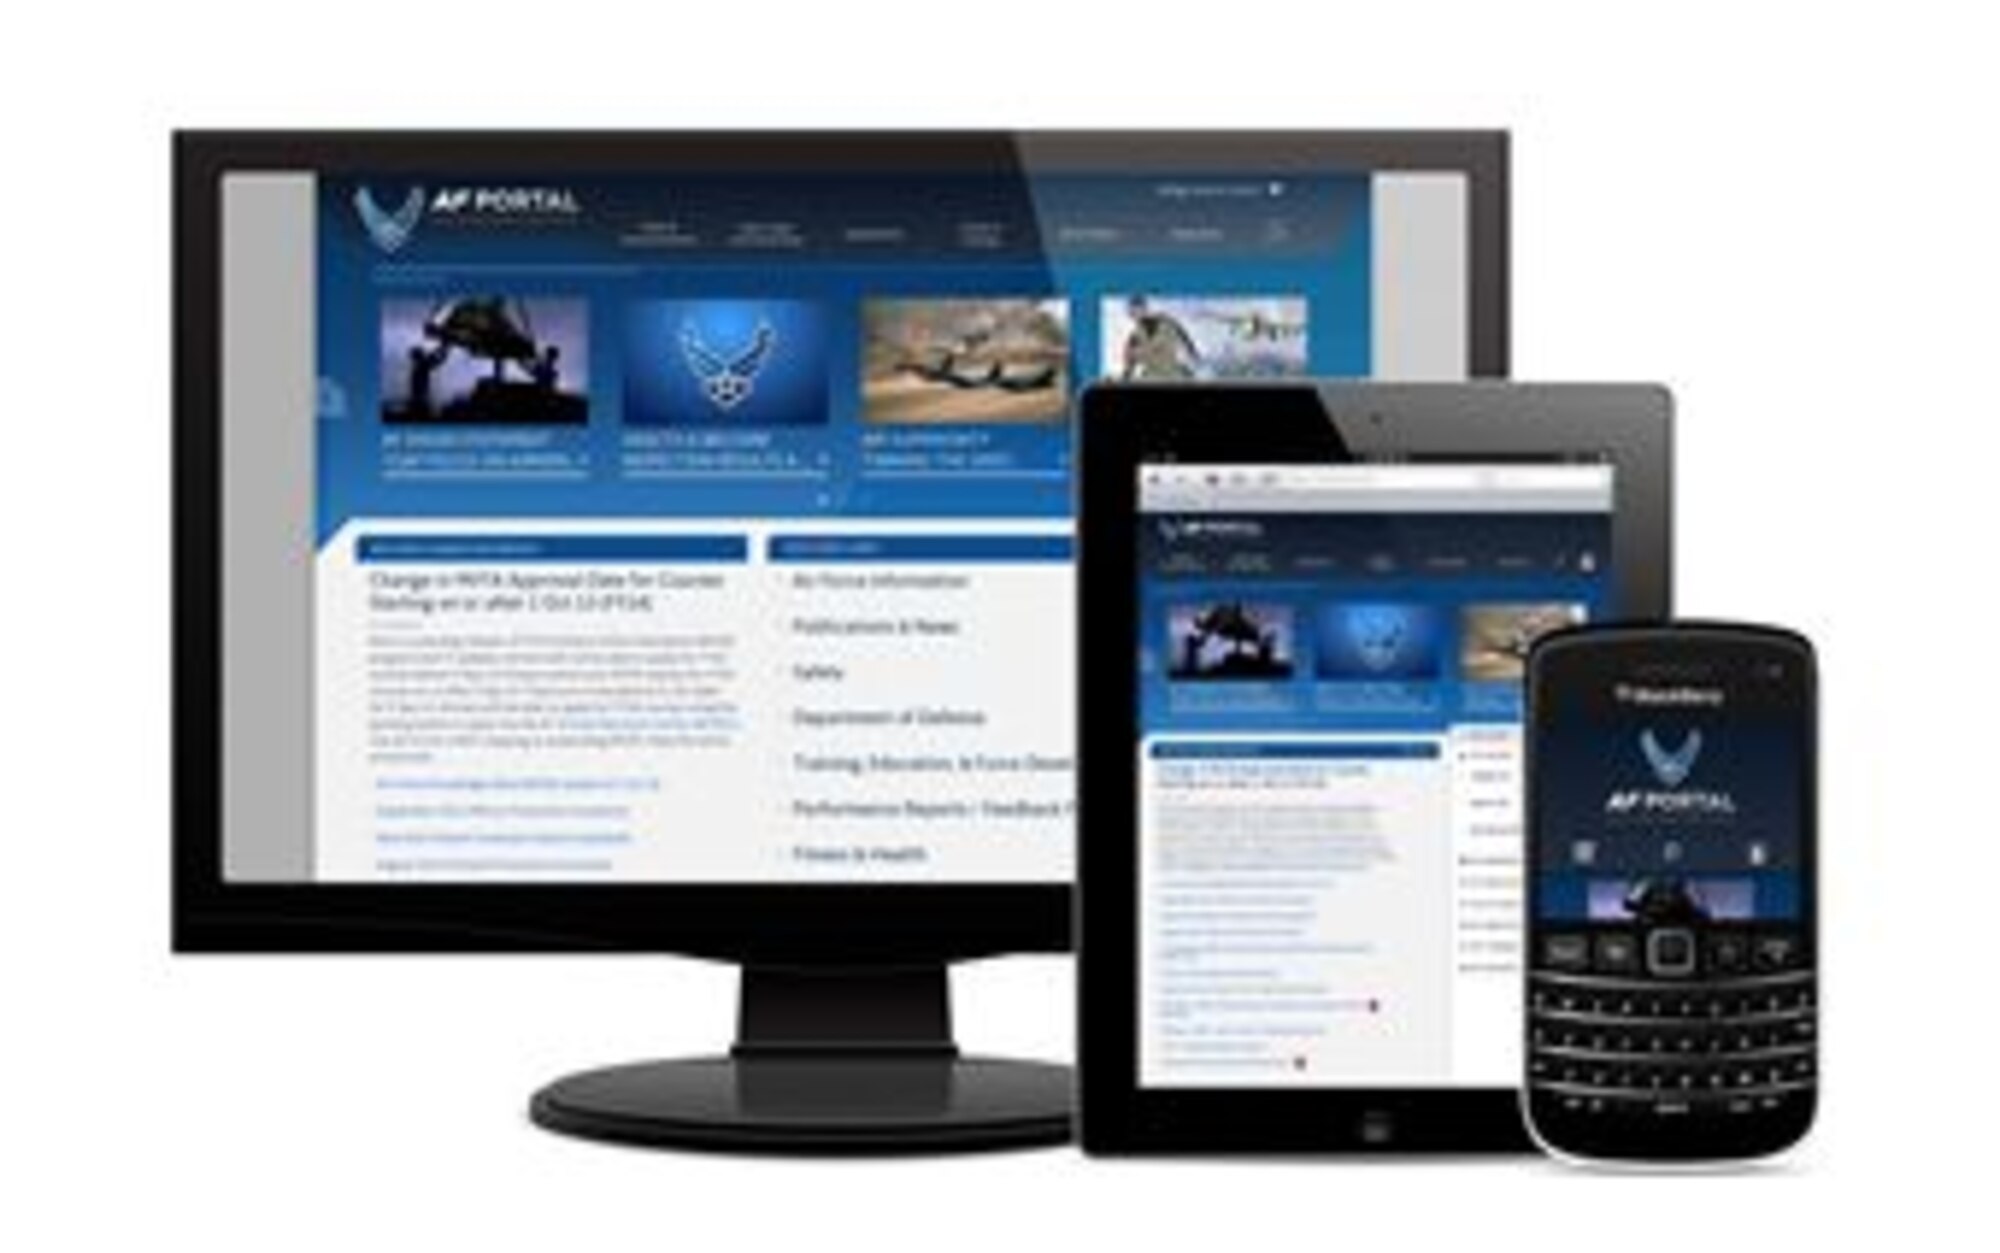 The Air Force Portal is undergoing a redesign that allows
access on mobile devices, geared for easier navigation and operates in low
bandwidth environments. The Global  Combat Support System, a Air Force Life
Cycle Management Center-owned program, is responsible for the portal update,
allowing more than 750,000 active users to stay connected. The update is
scheduled to take place by the end of the year. (Courtesy graphic)
